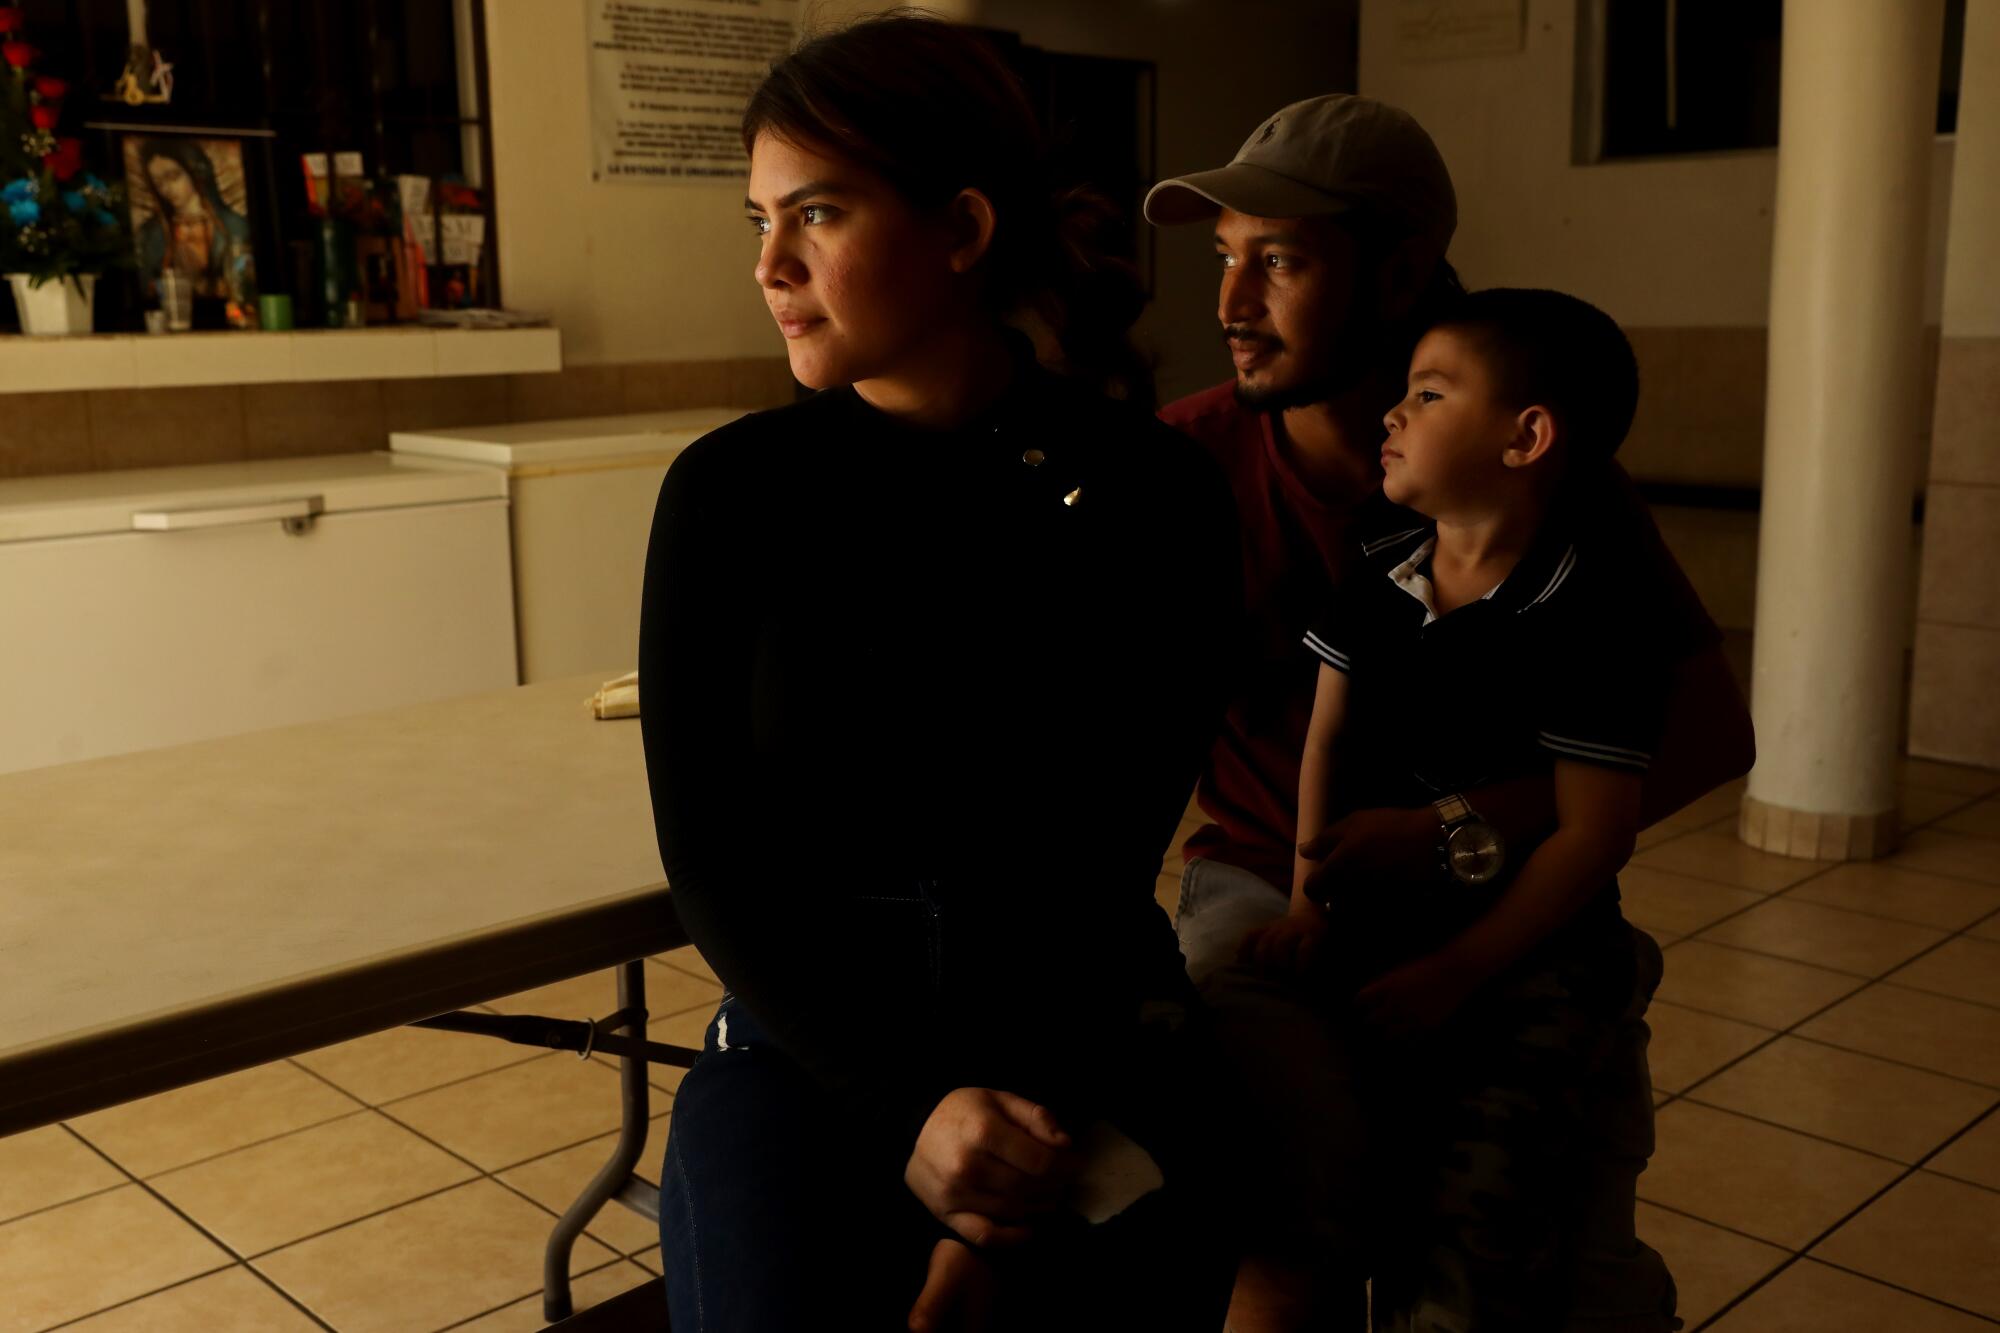 A woman, man and young boy sitting together in a dimly lit room, looking into the distance.